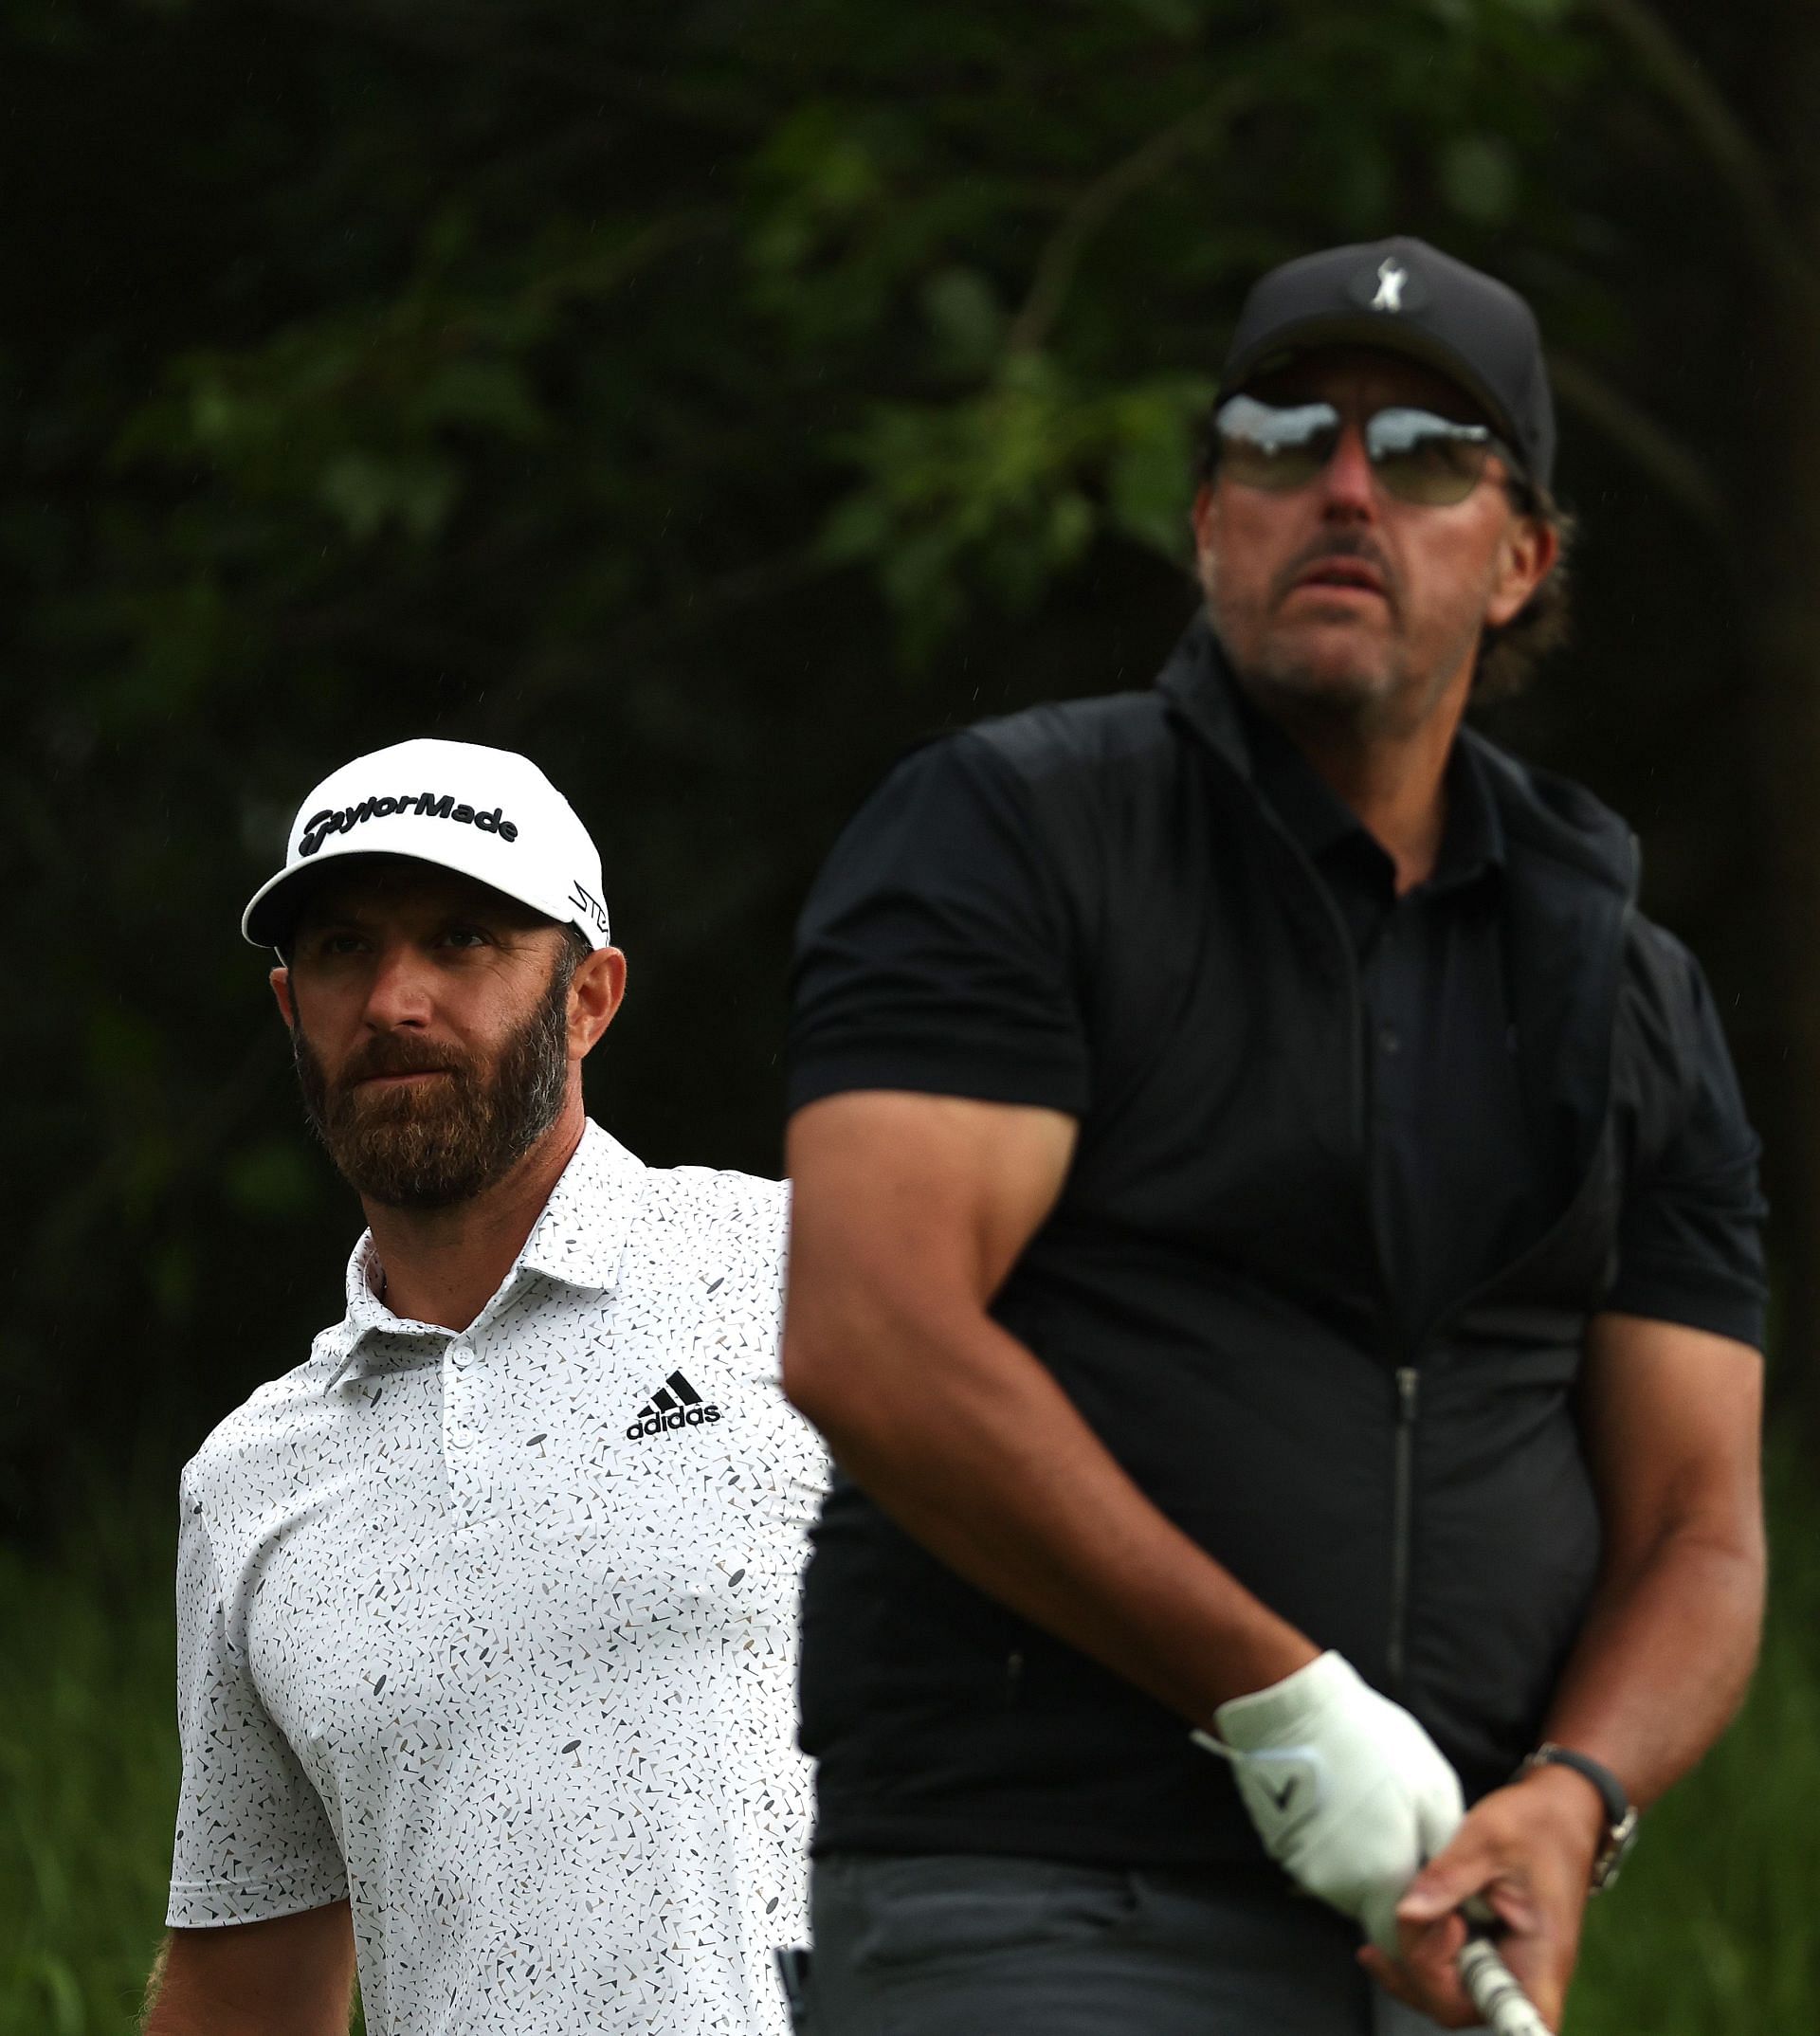 Dustin Johnson (L) and Phil Mickelson at the LIV Golf Invitational - London - Day One (Image via Matthew Lewis/Getty Images))